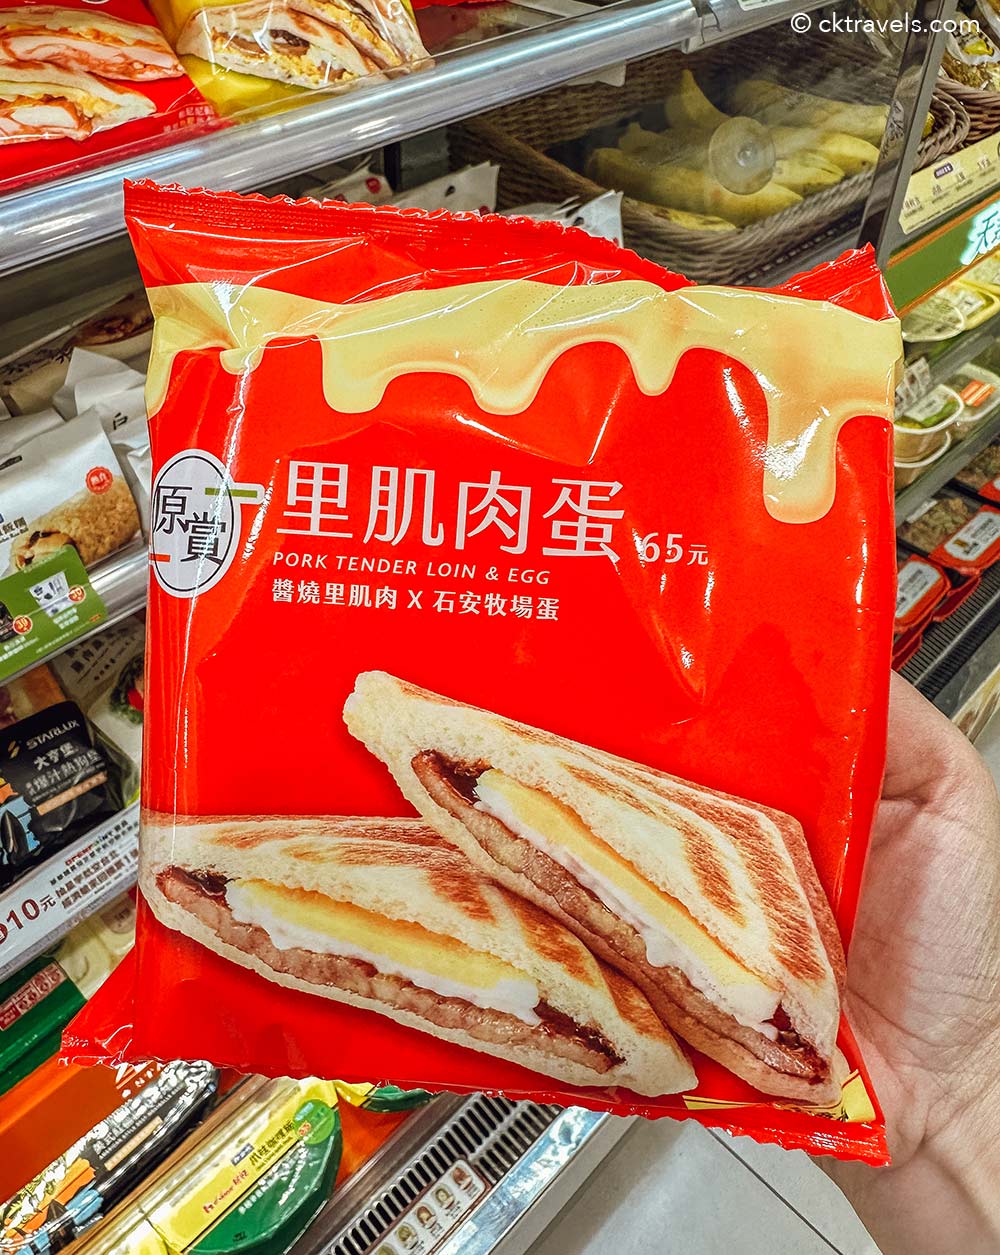 Pork Tenderloin and Egg Overload Toasted Sandwich at Taiwan 7-Eleven